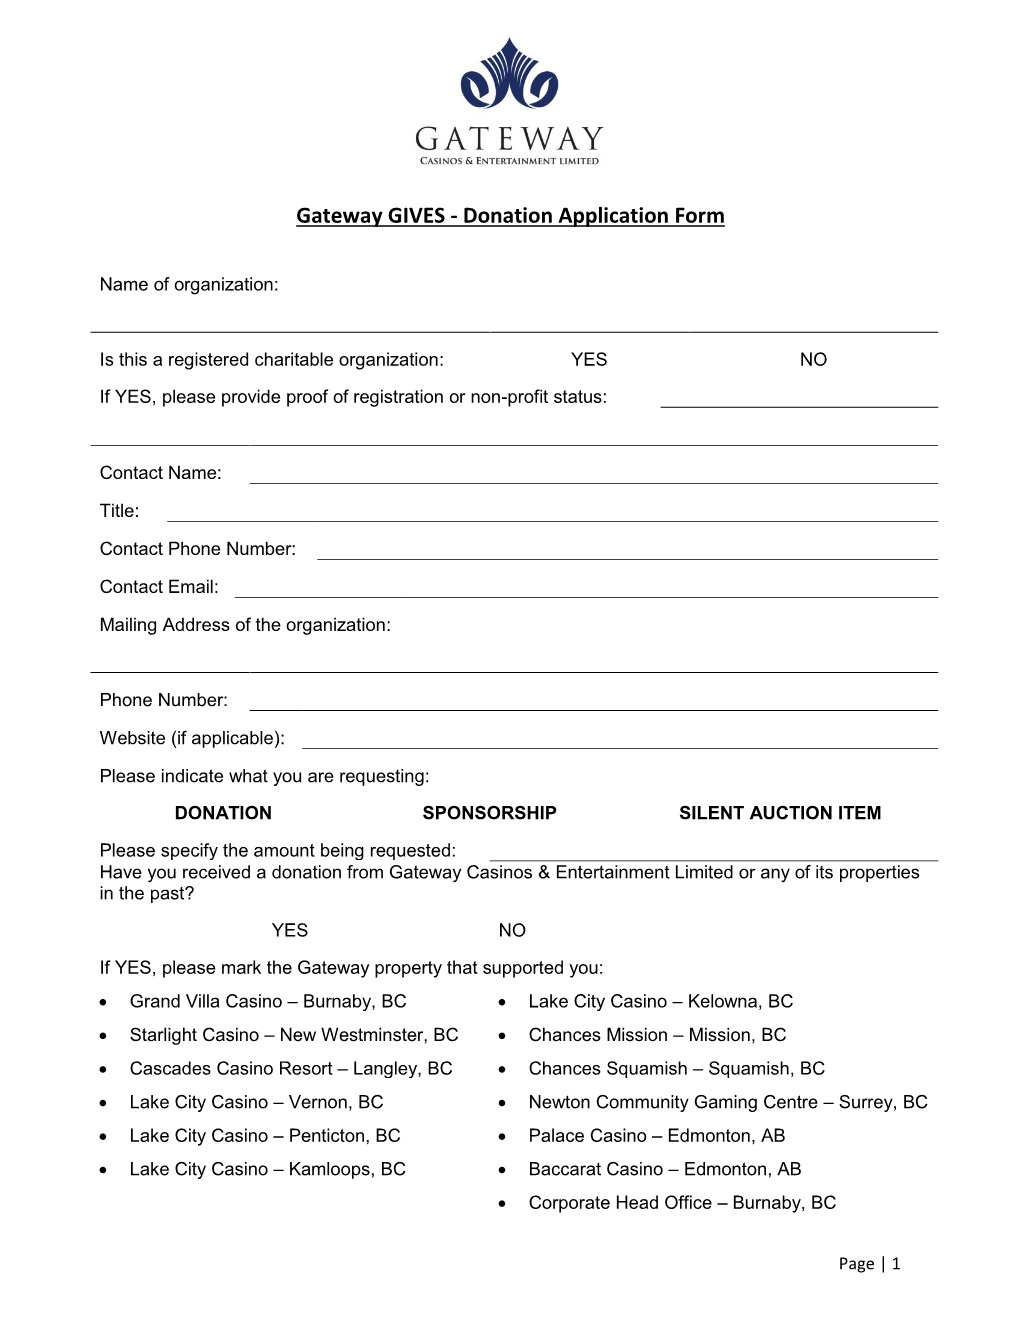 Gateway GIVES - Donation Application Form